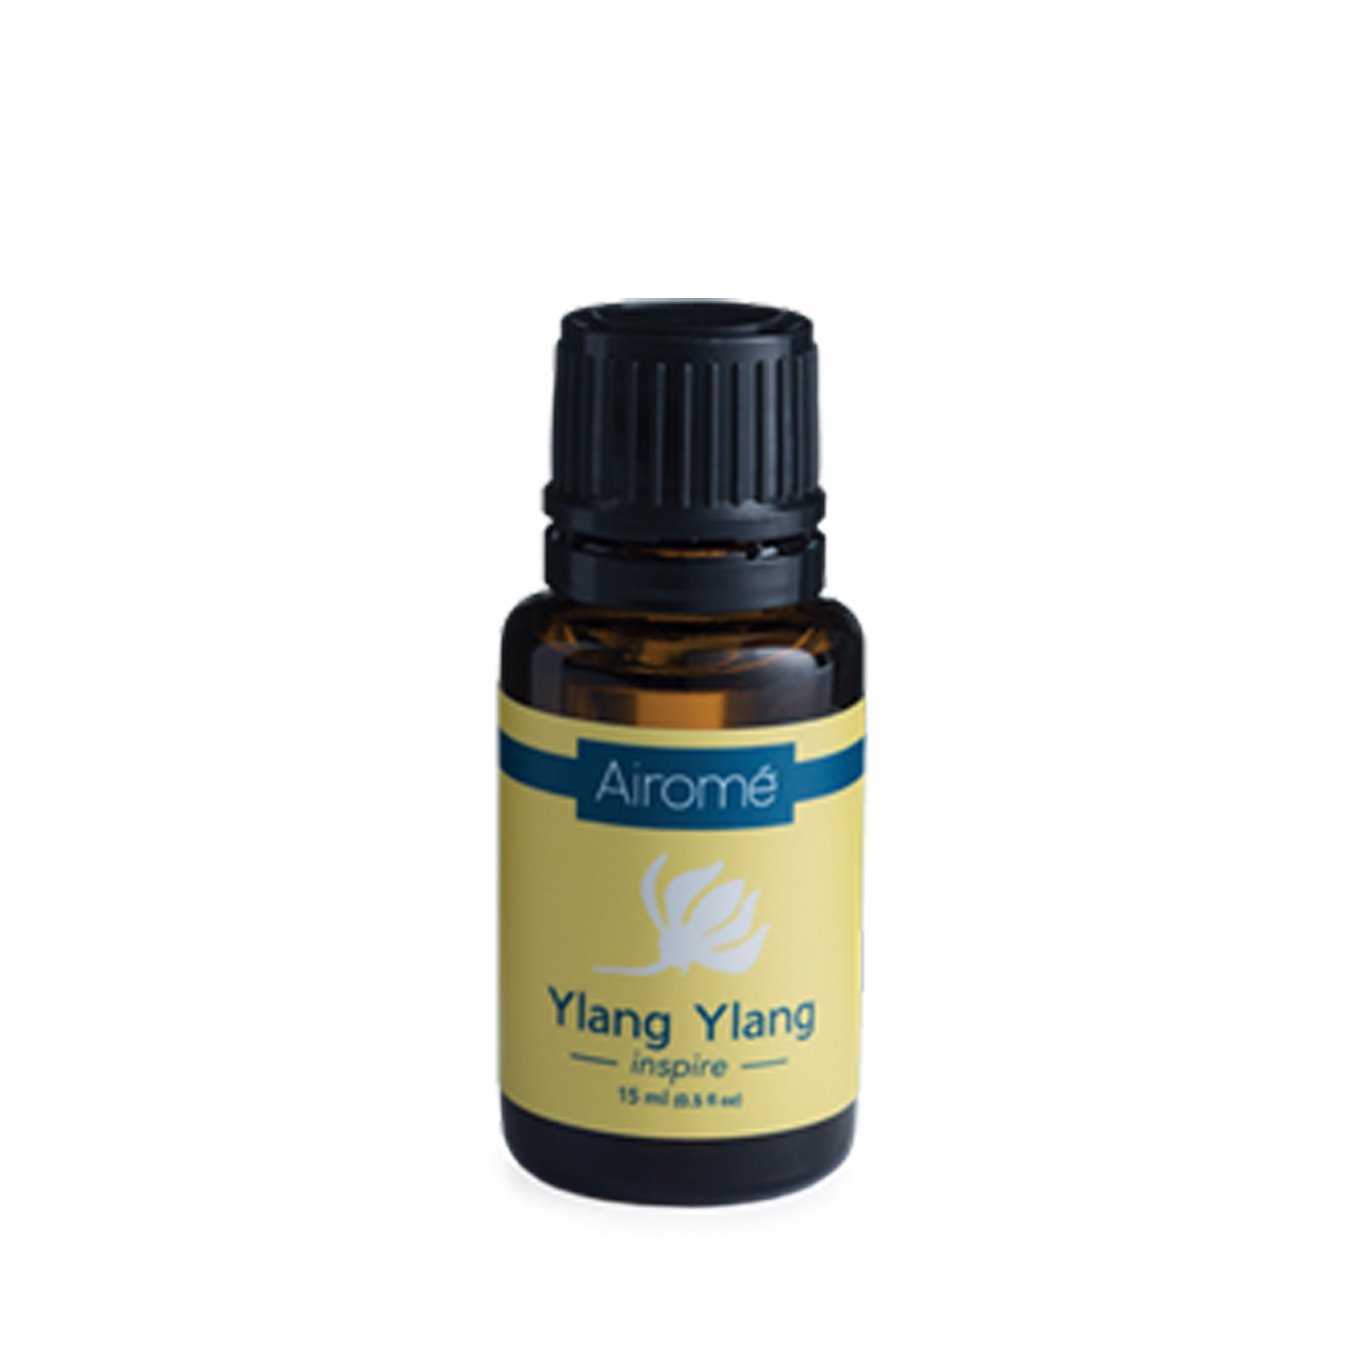 Airomé Ylang Ylang Essential Oil 100% Pure